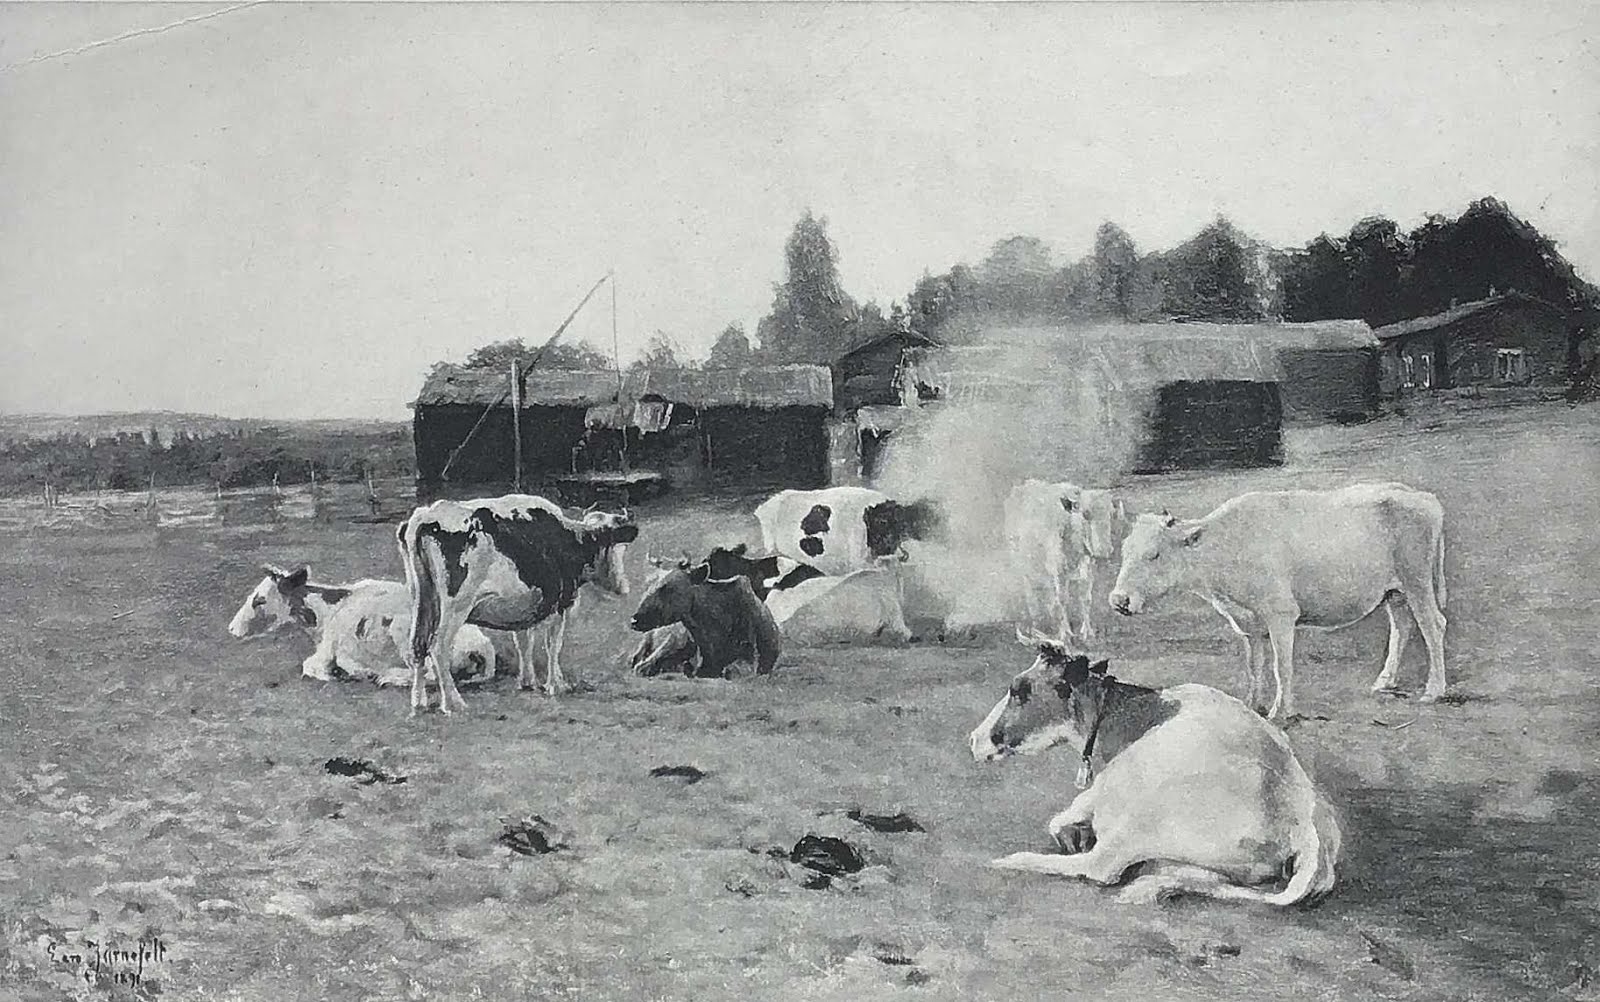 Replica of a painting by Eero Järnefelt (1891) of cattle next to burning turf